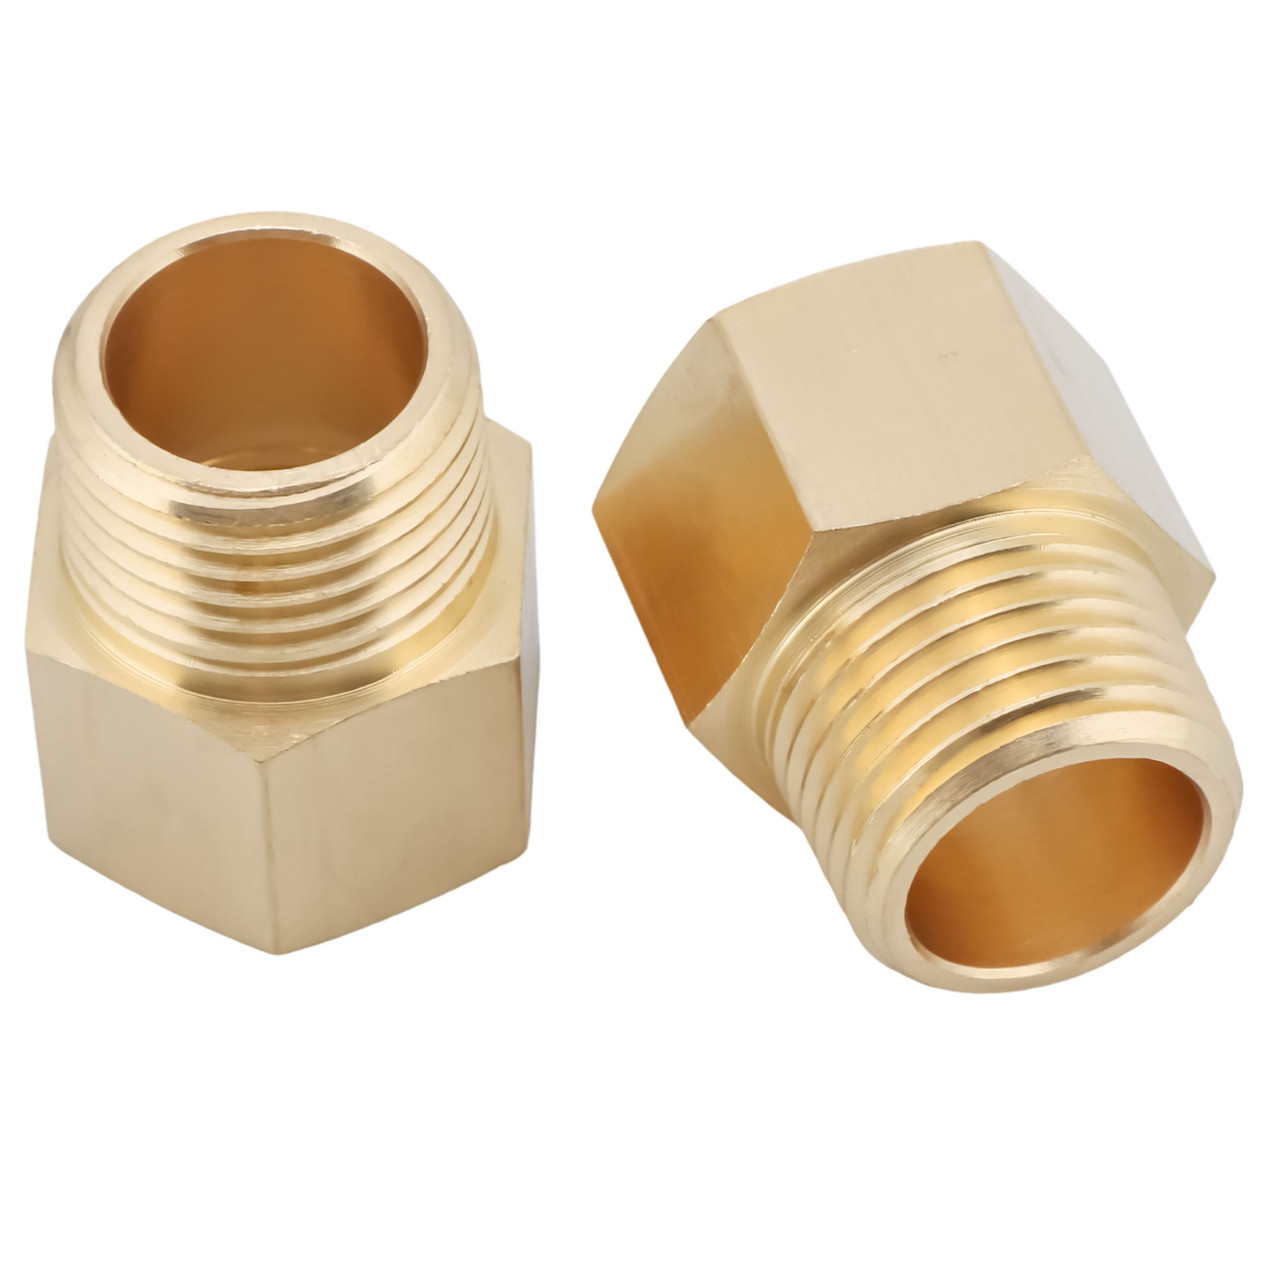 U.S. Solid 2pcs Brass Pipe Fitting Adapter, Male Pipe x Female